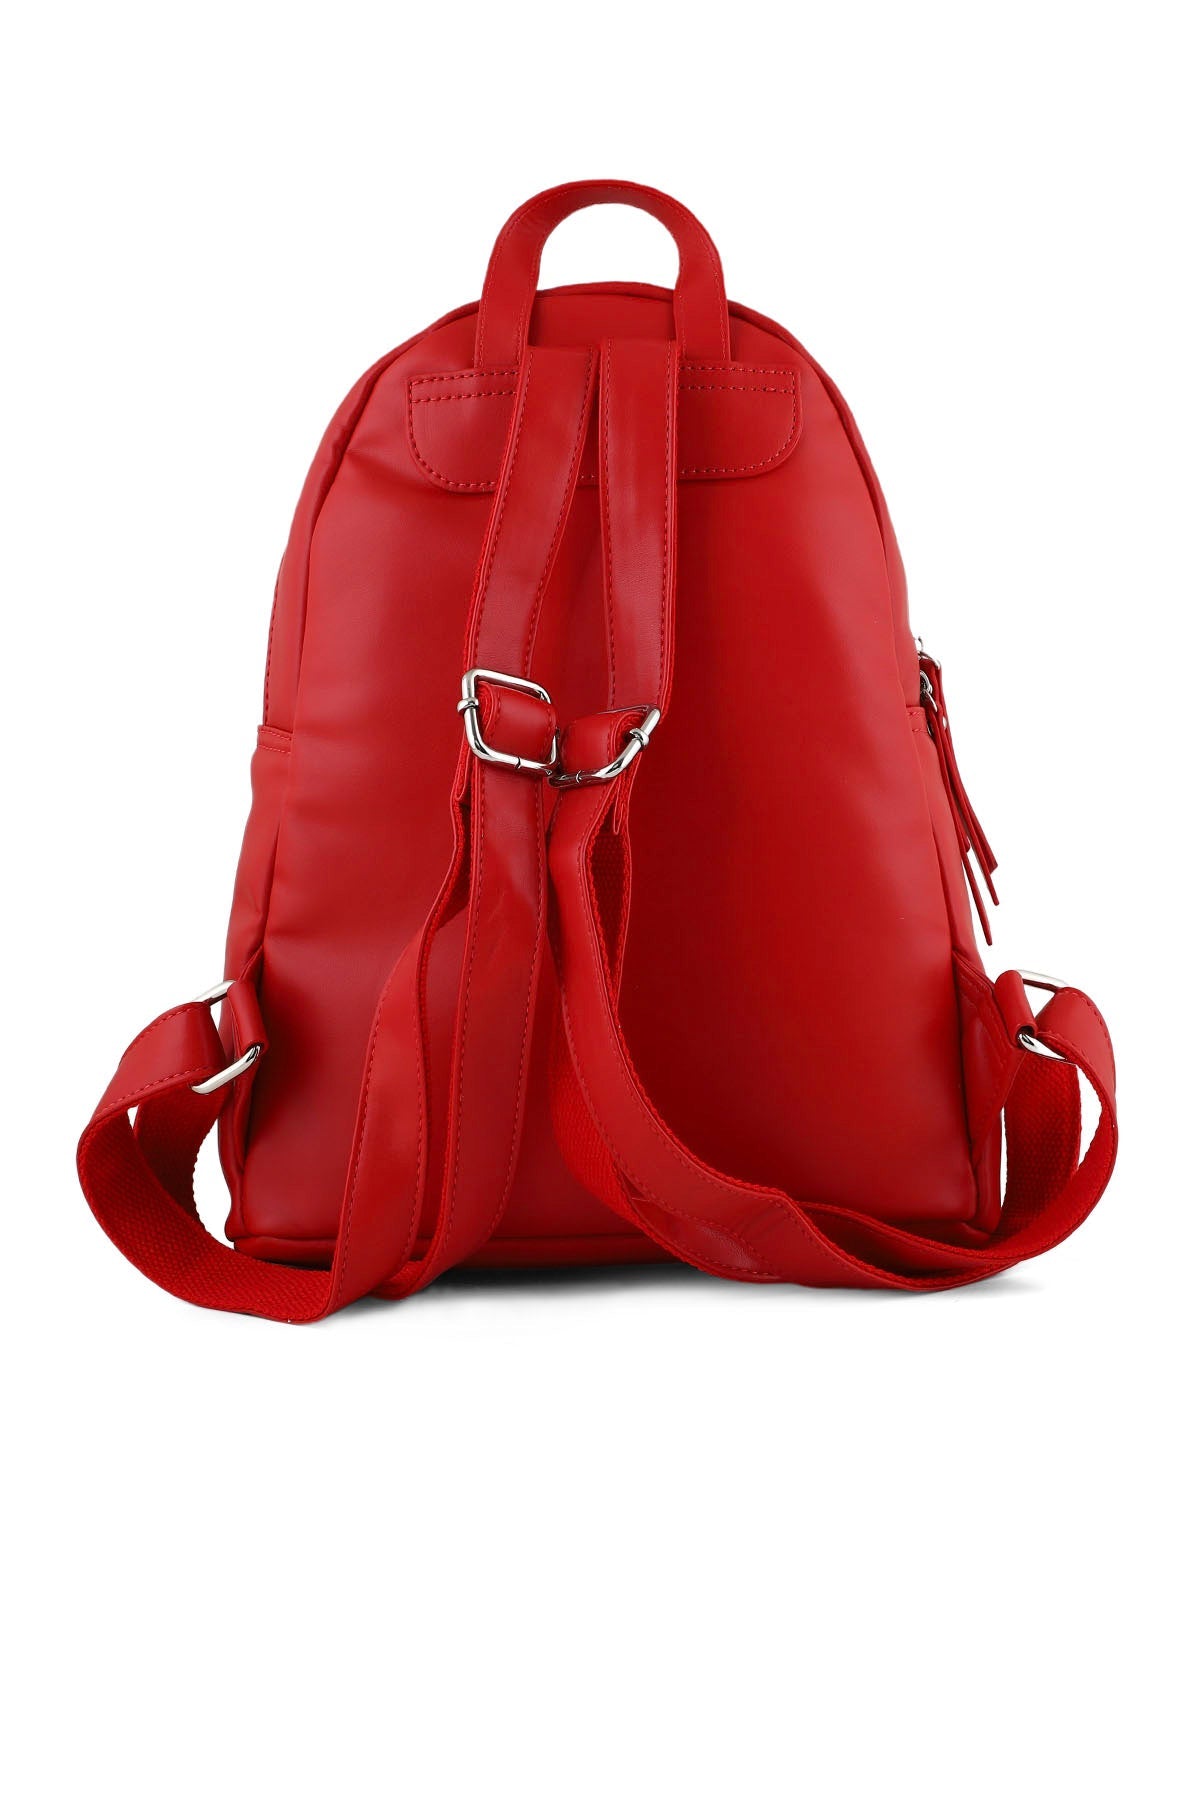 Backpack B15019-Red